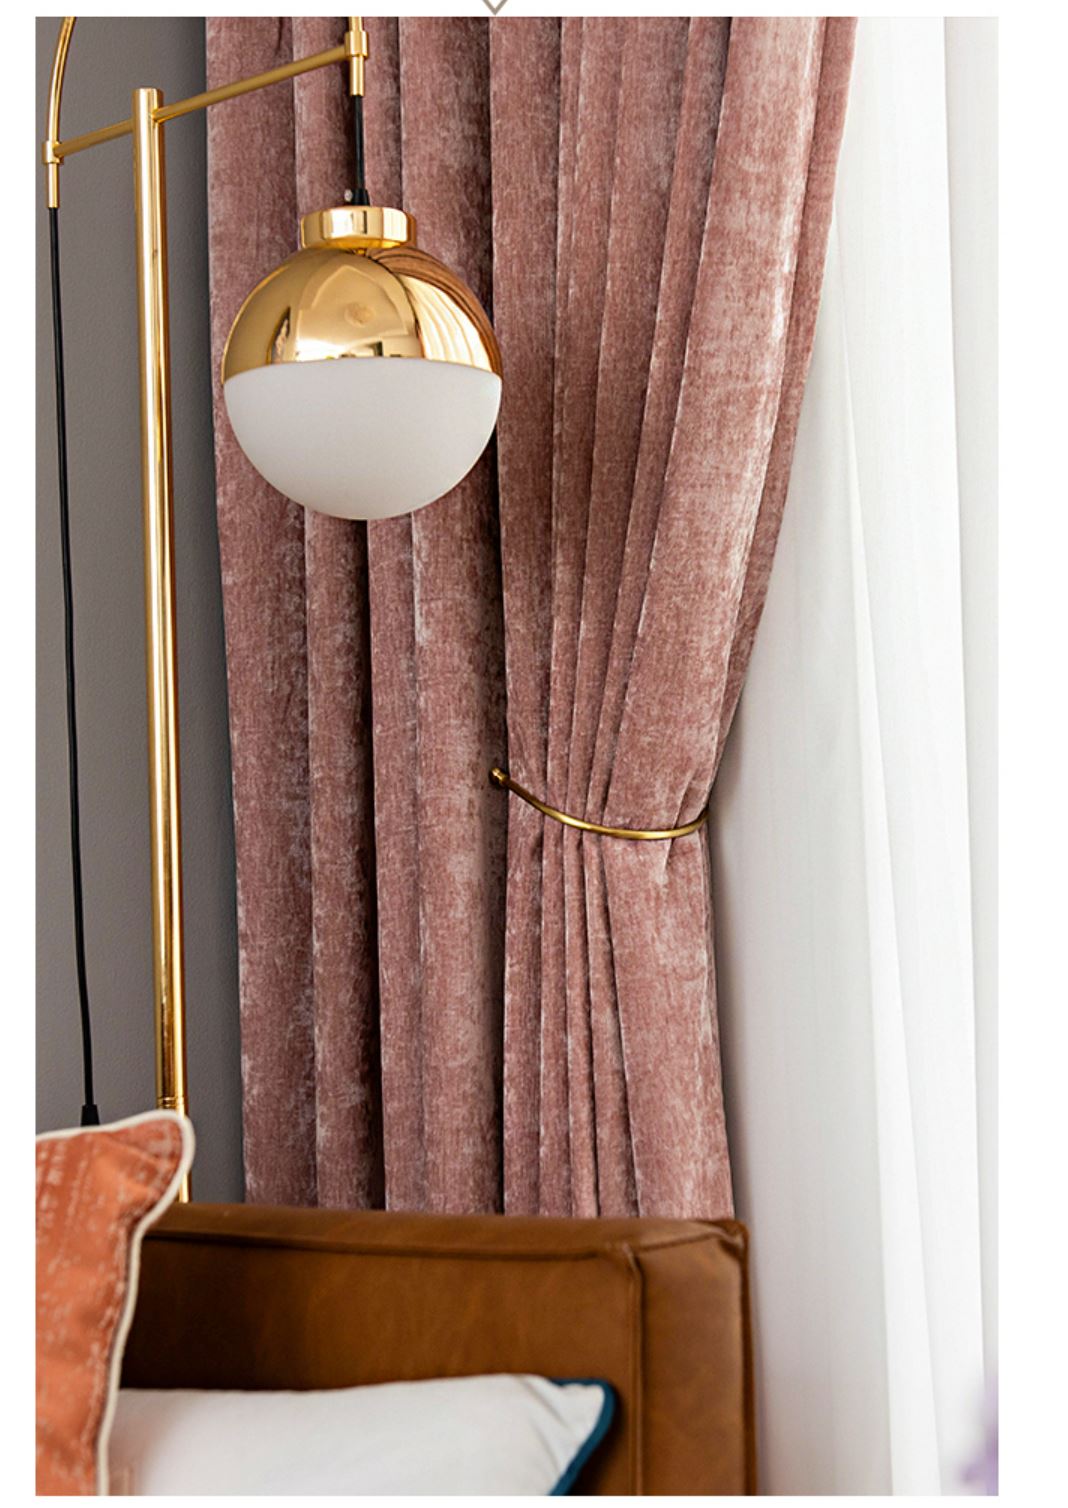 Double sided cashmere velvet blockout curtains - Custom made - CM-0024